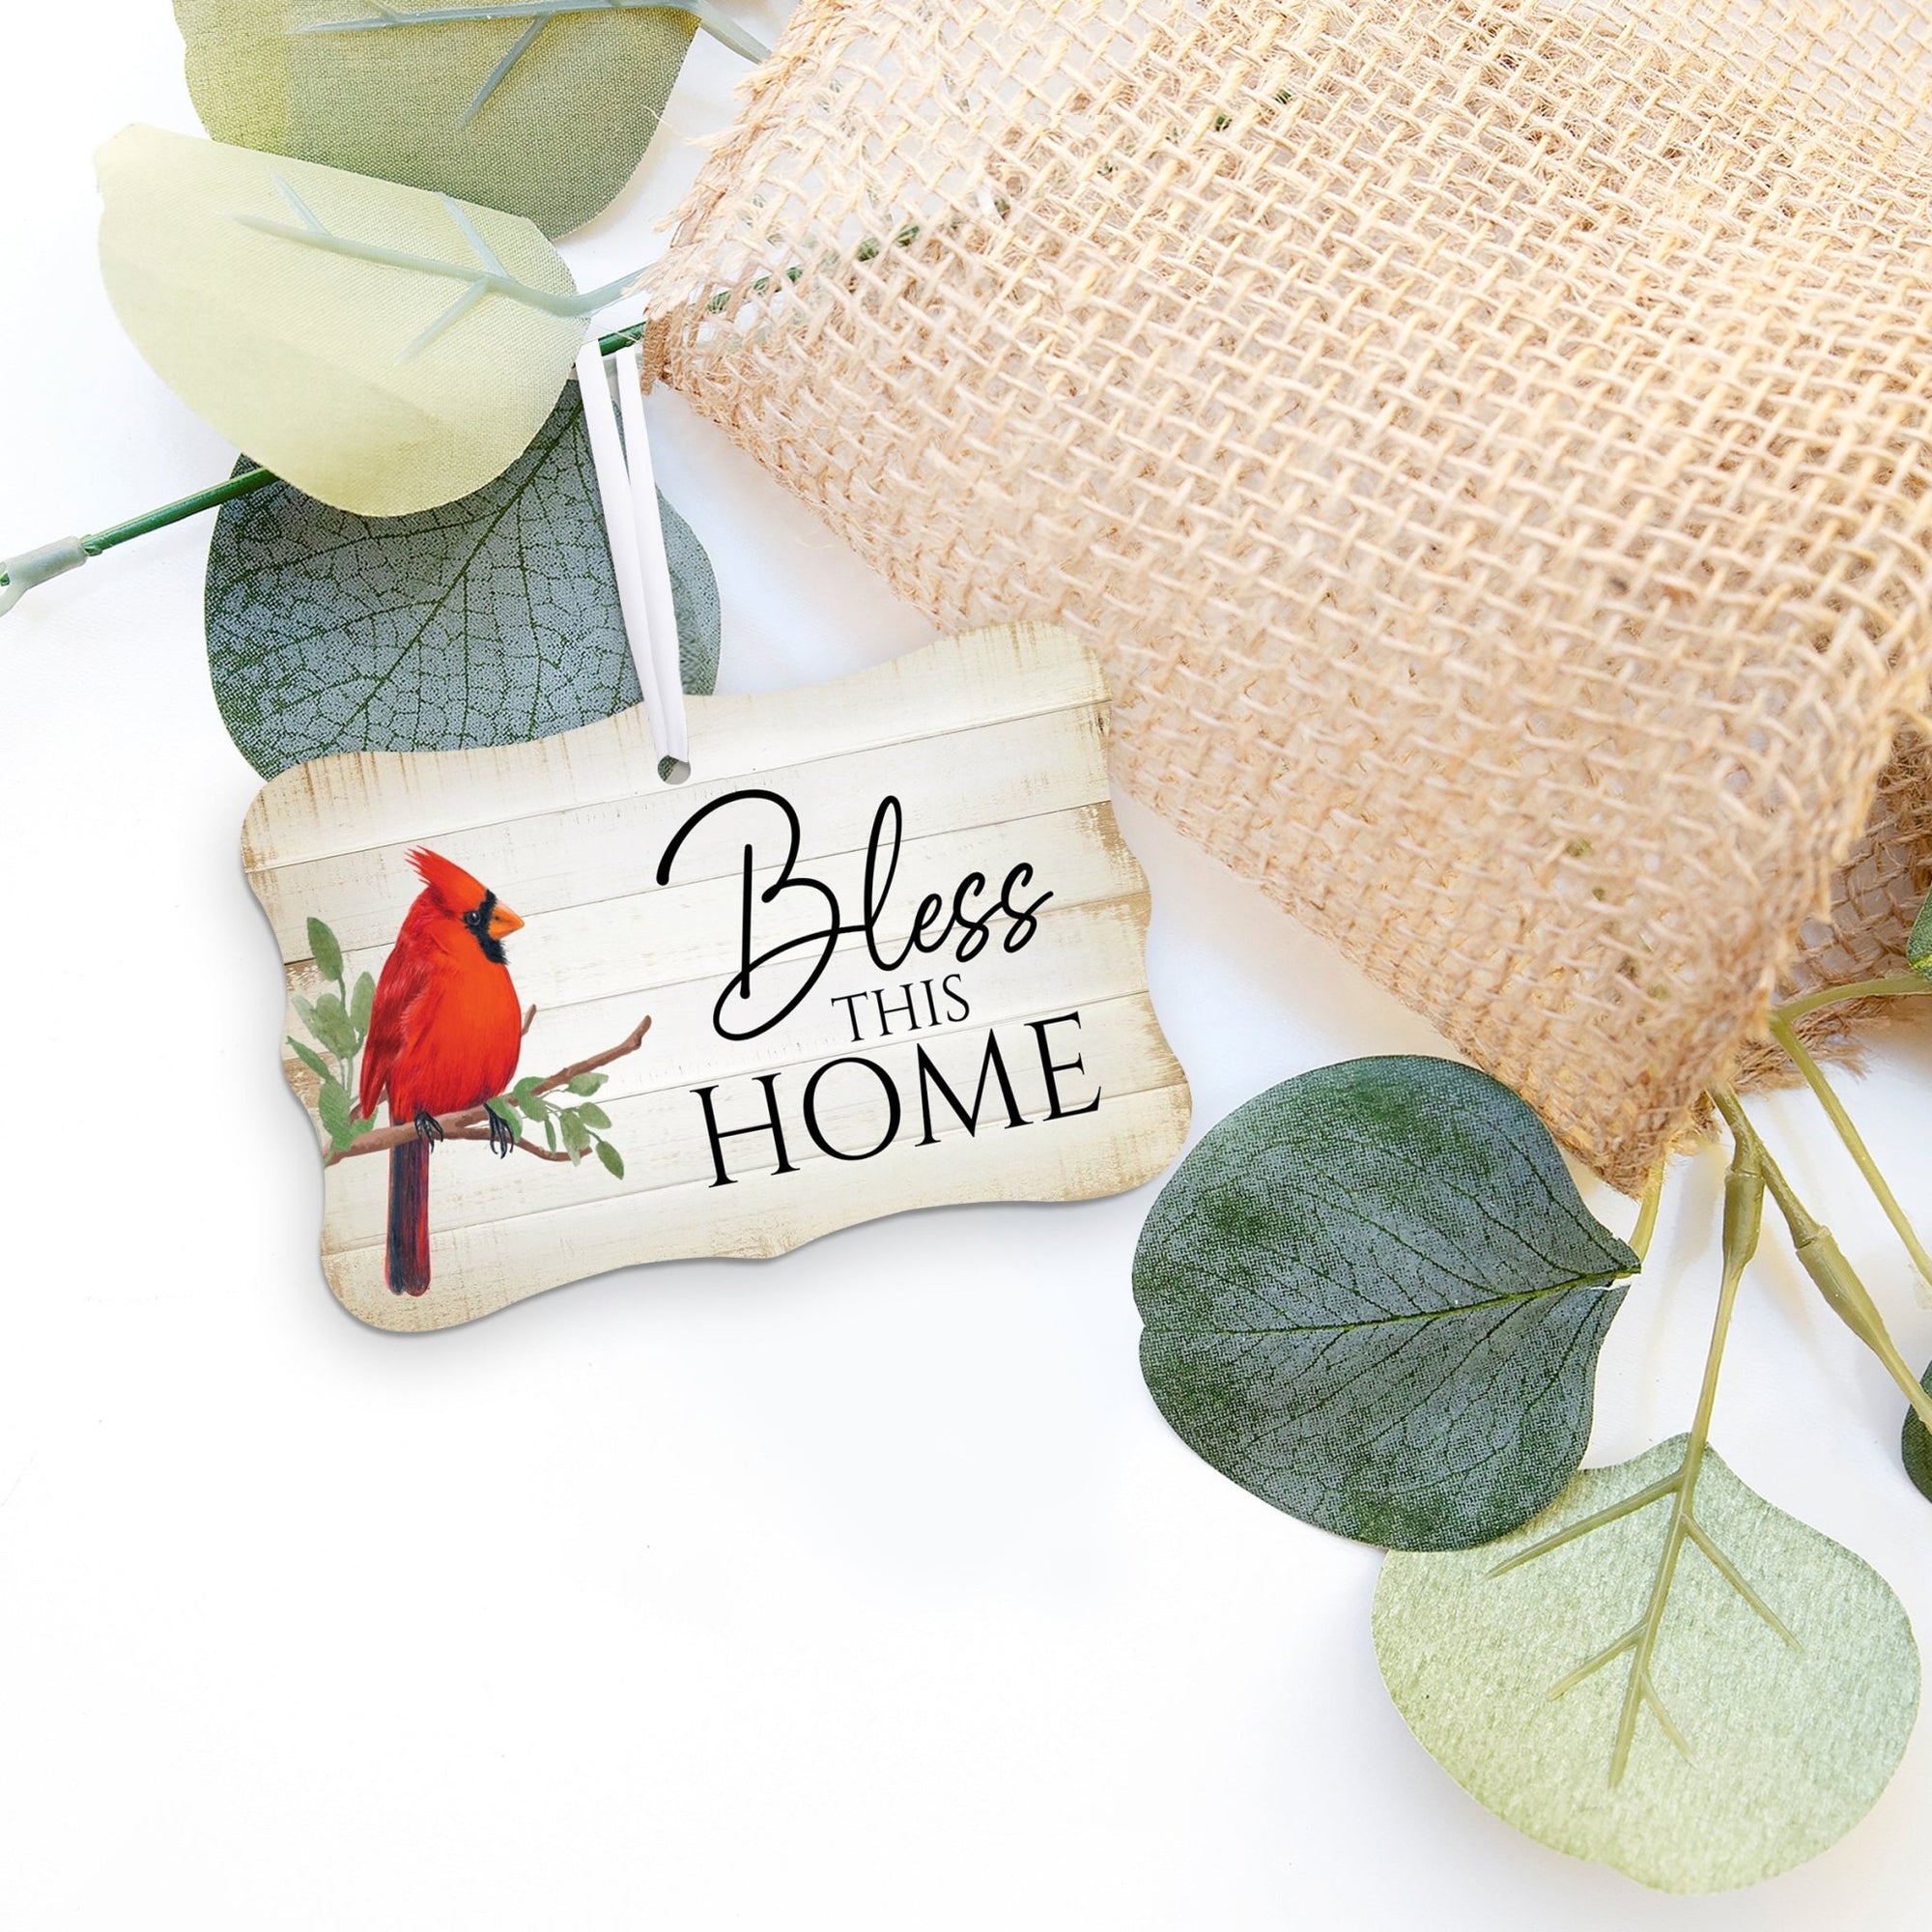 Rustic Scalloped Cardinal Wooden Ornament With Everyday Verses Gift Ideas - Bless This Home - LifeSong Milestones